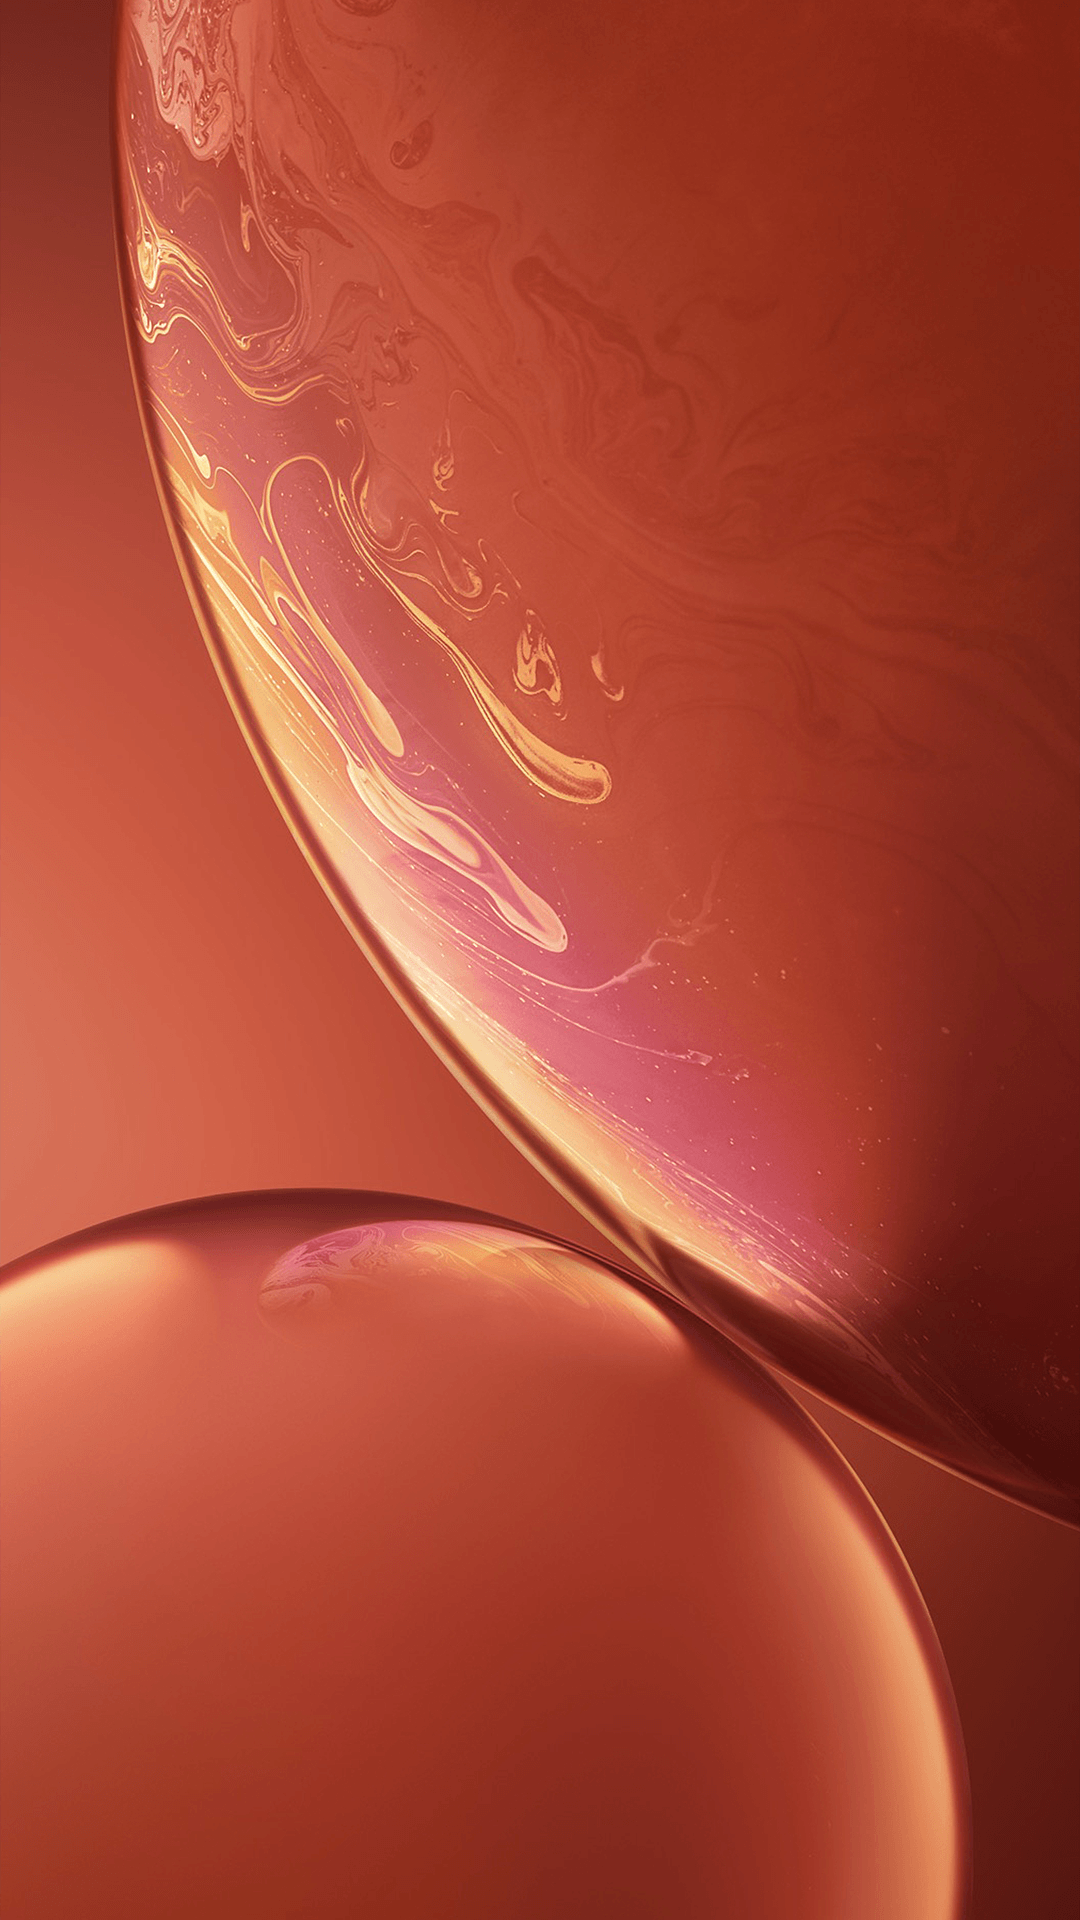 Wallpaper: iPhone Xs, iPhone Xs Max, and iPhone Xr